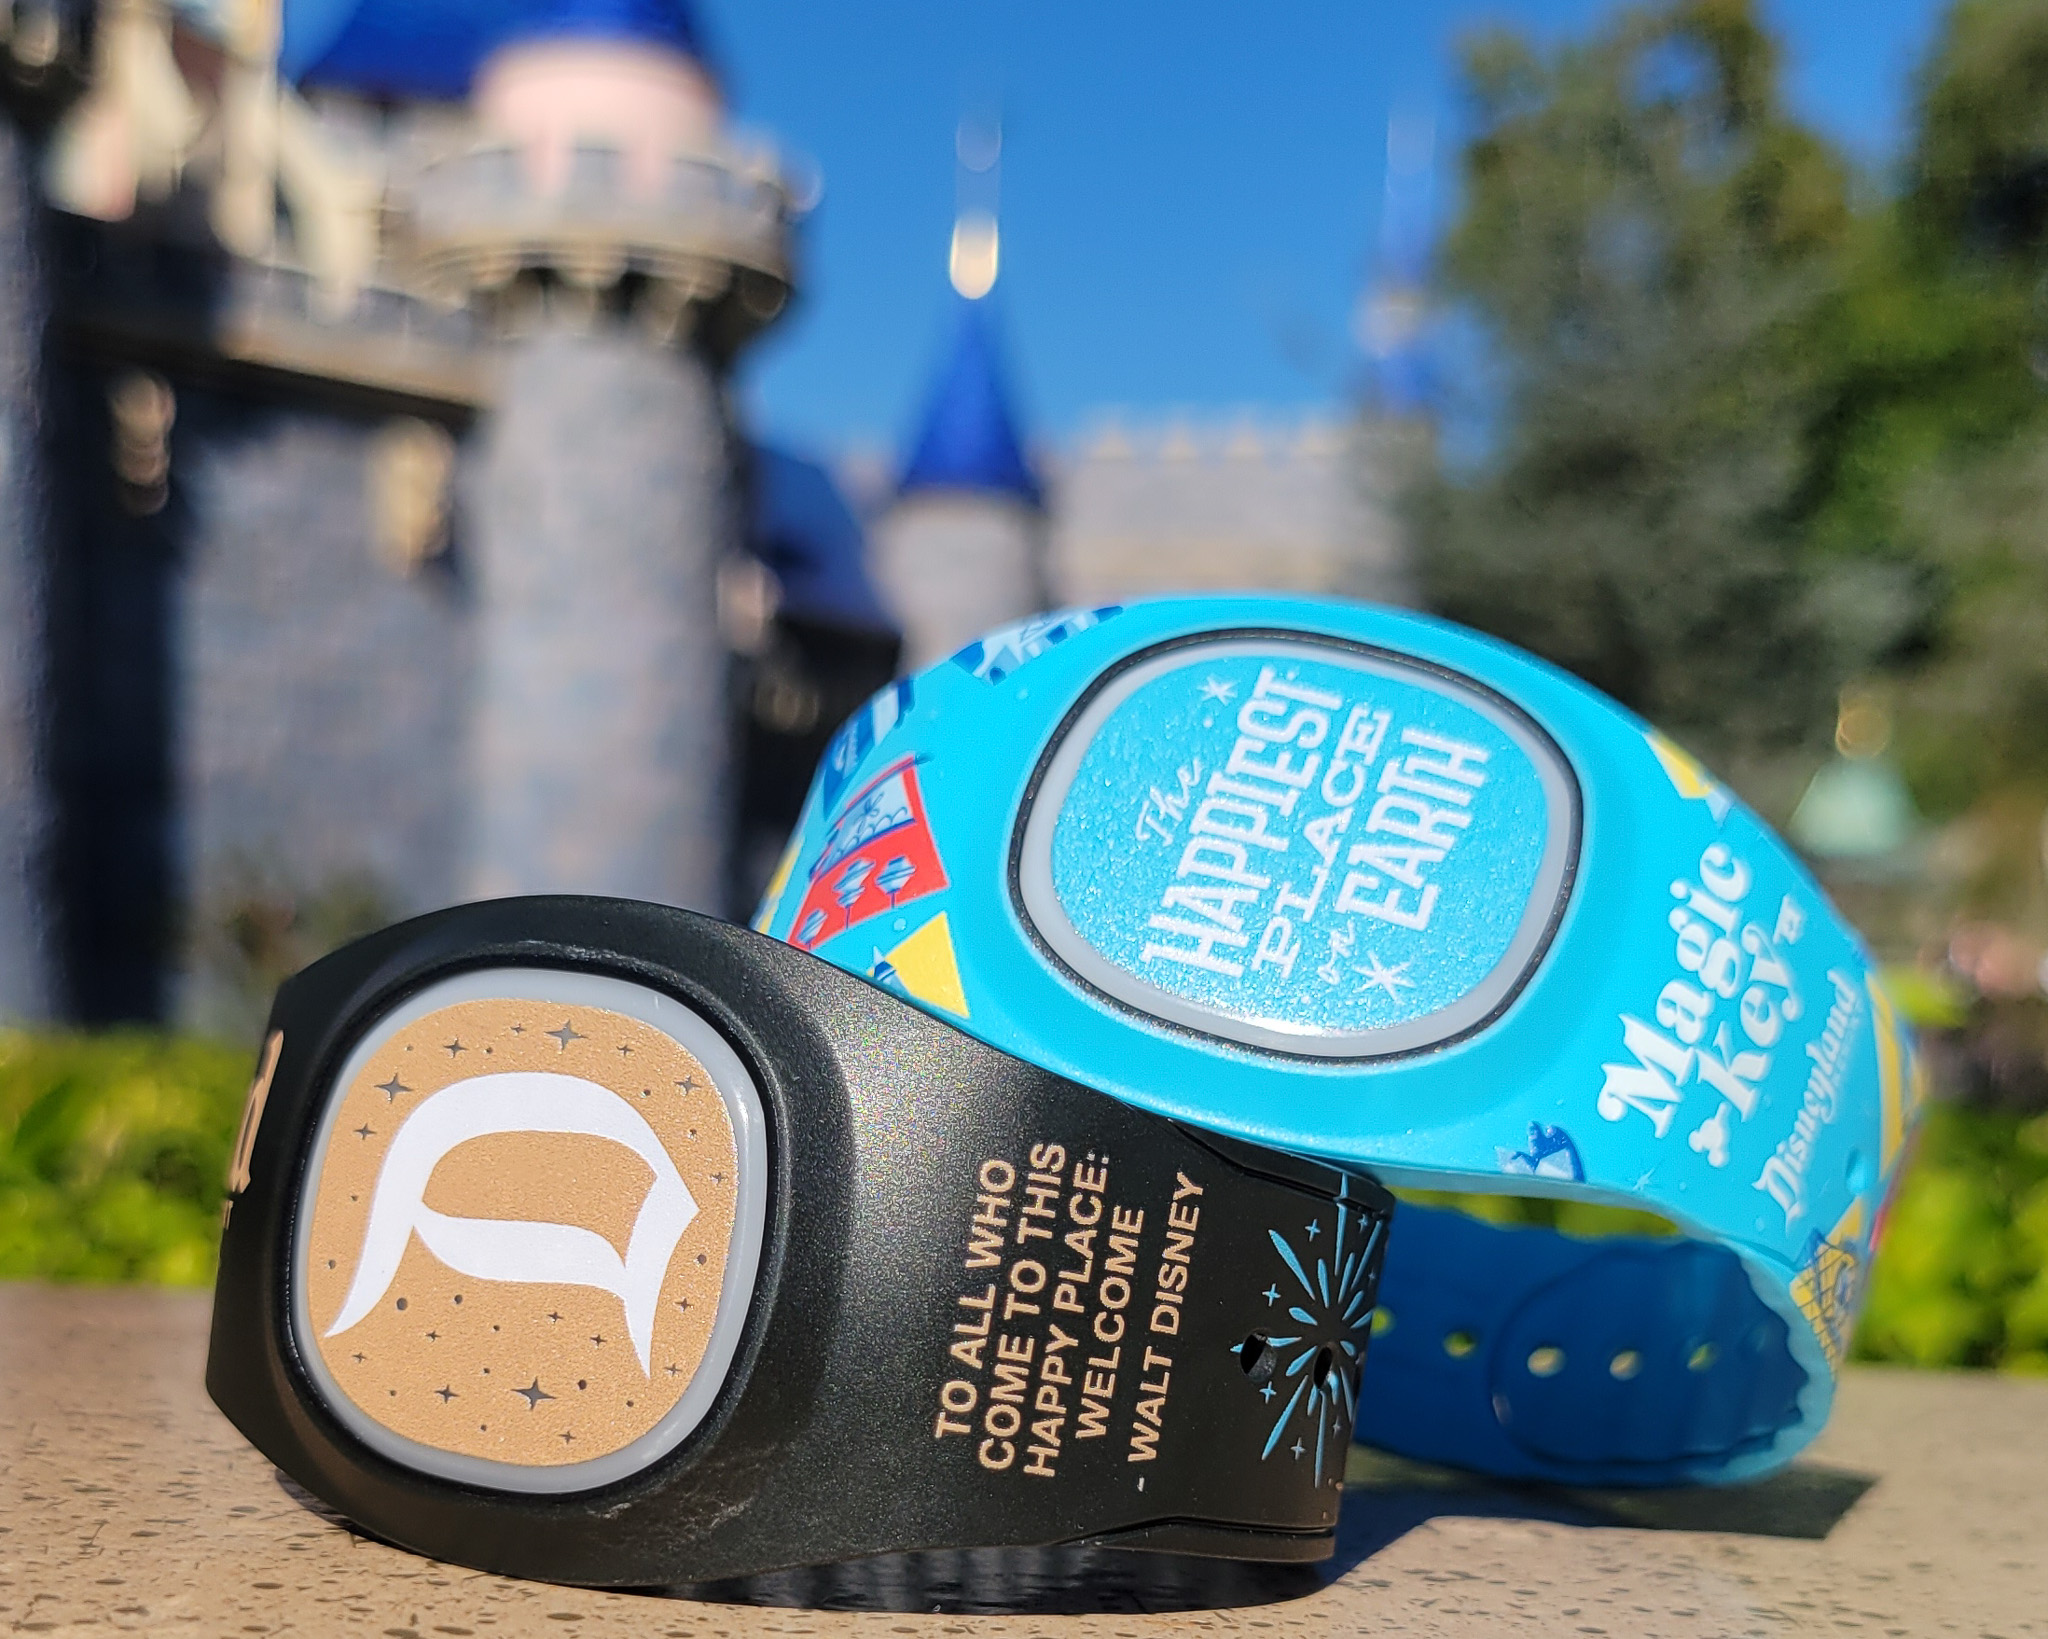 Magic Bands at Disneyland on a ledge with Disneyland Castle behind them